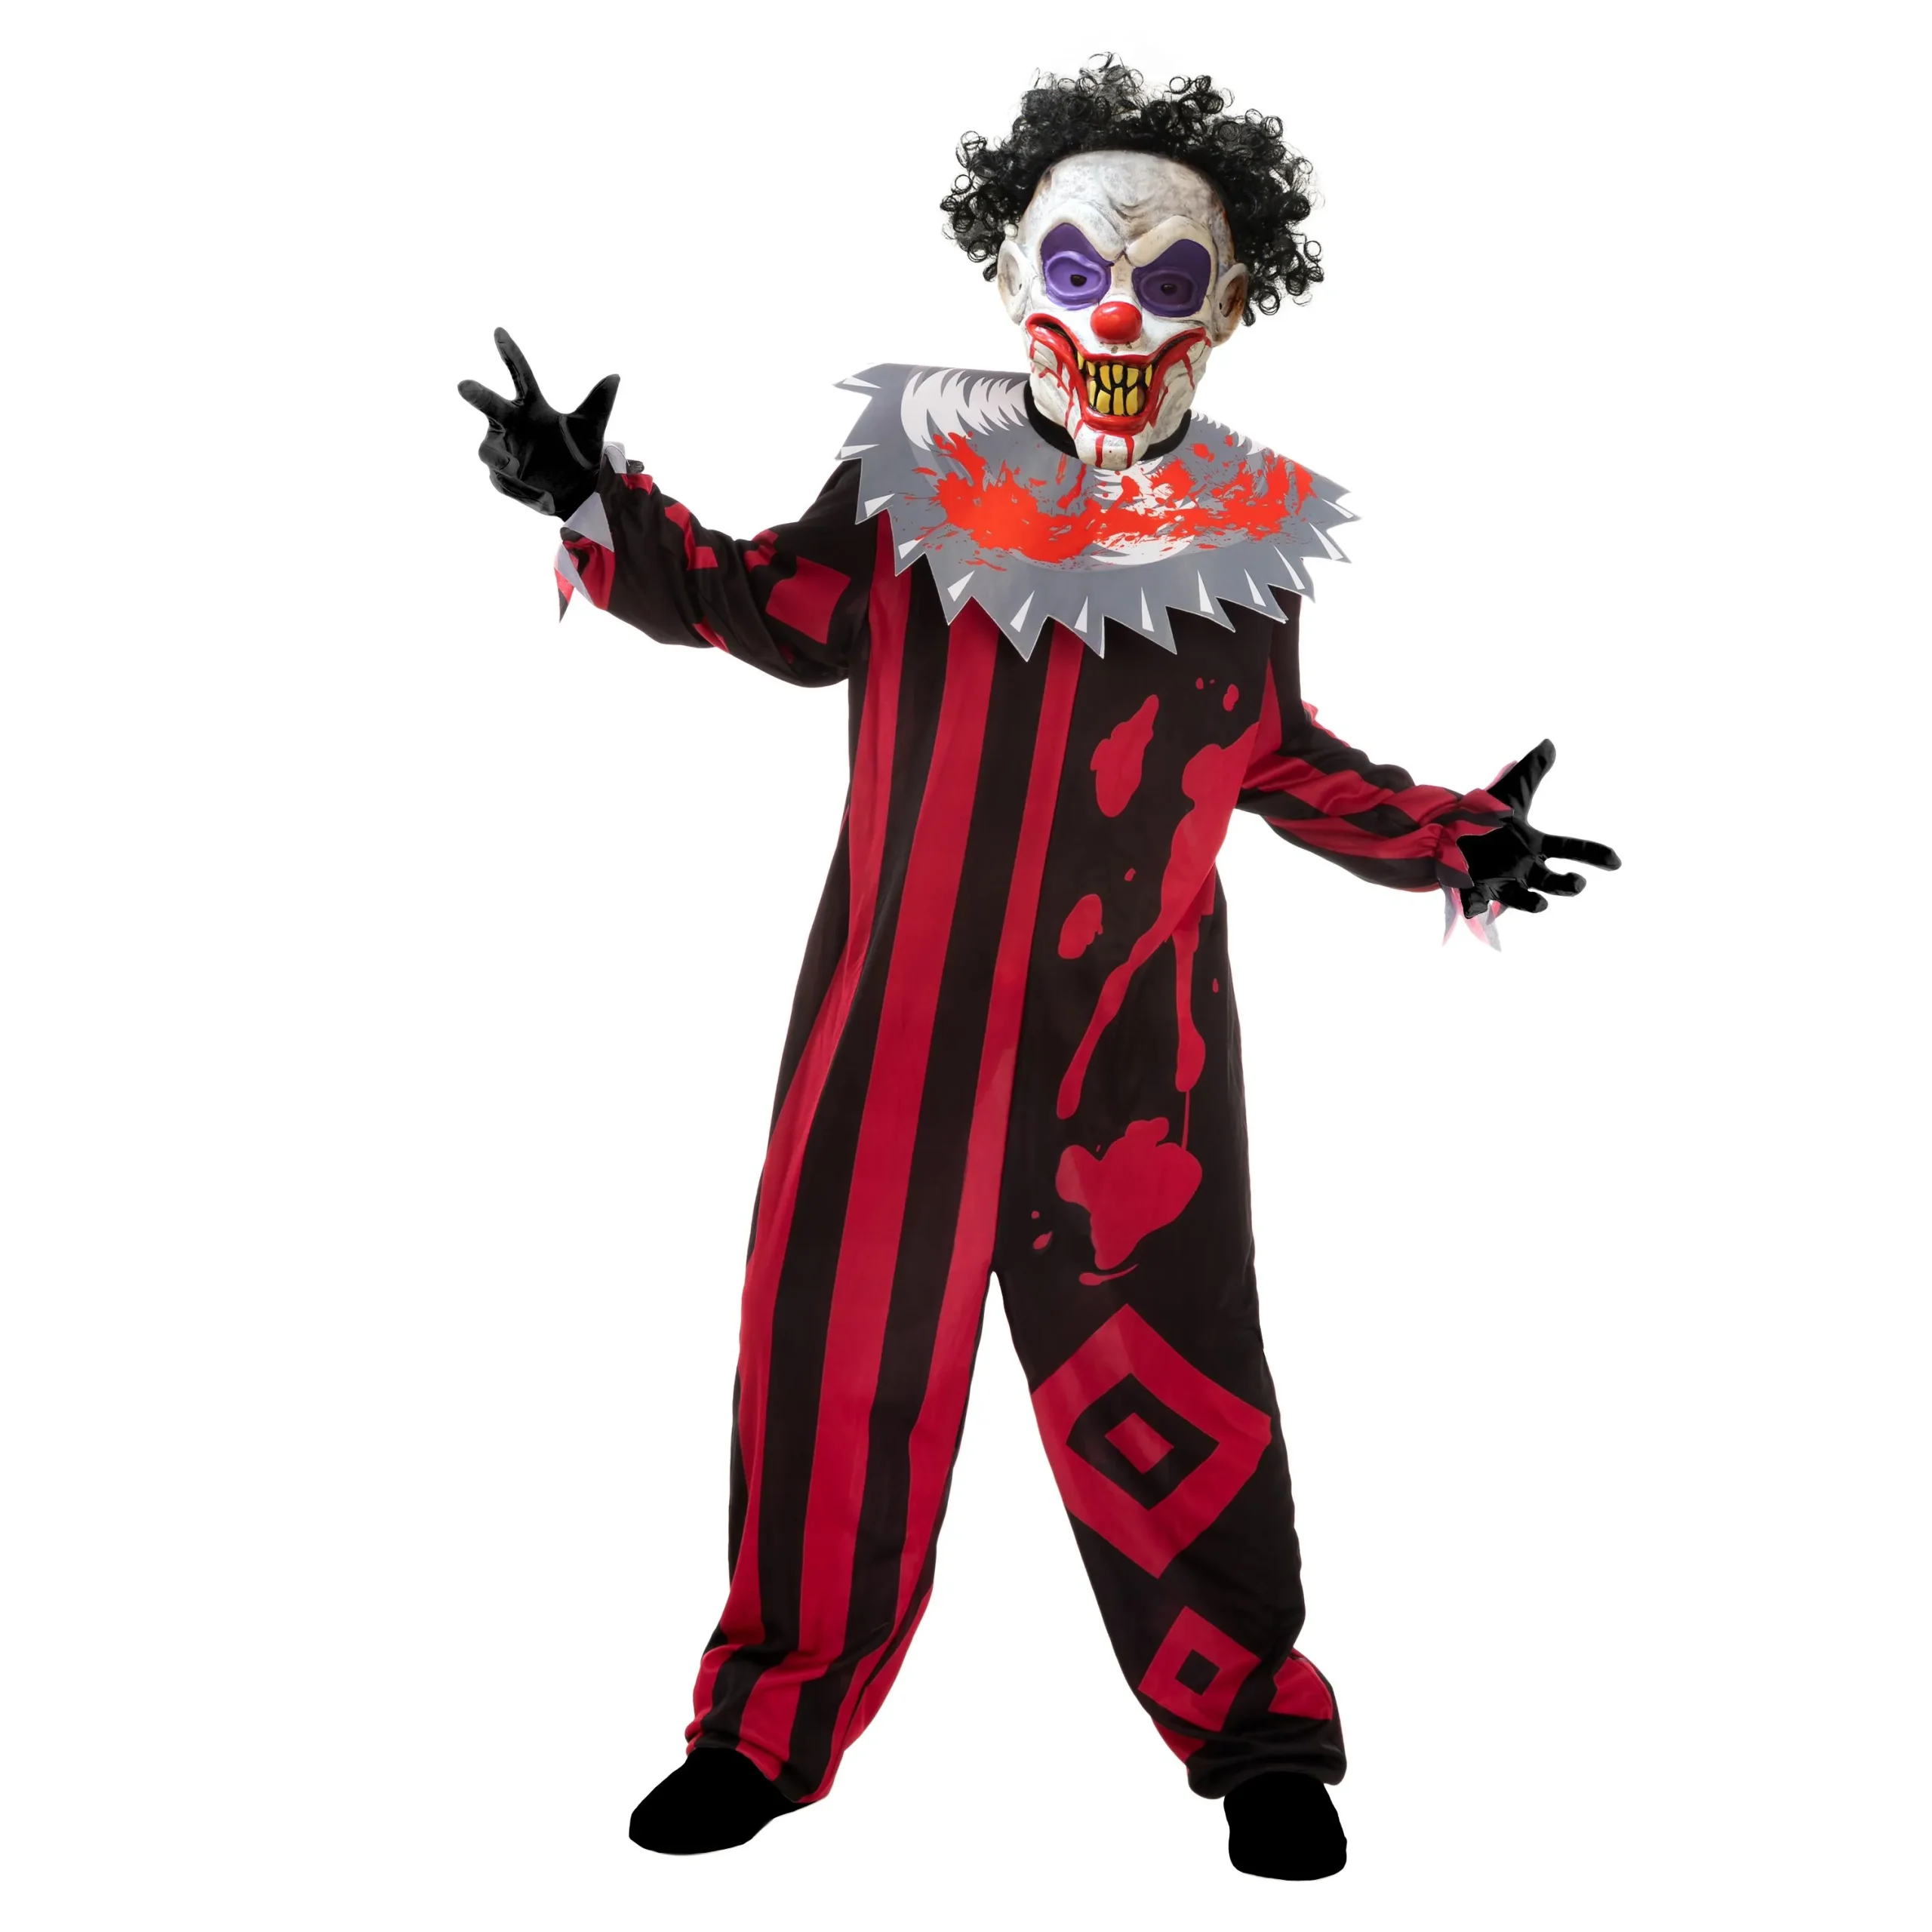 Clown Costumes - One Stop Shop for All Celebration